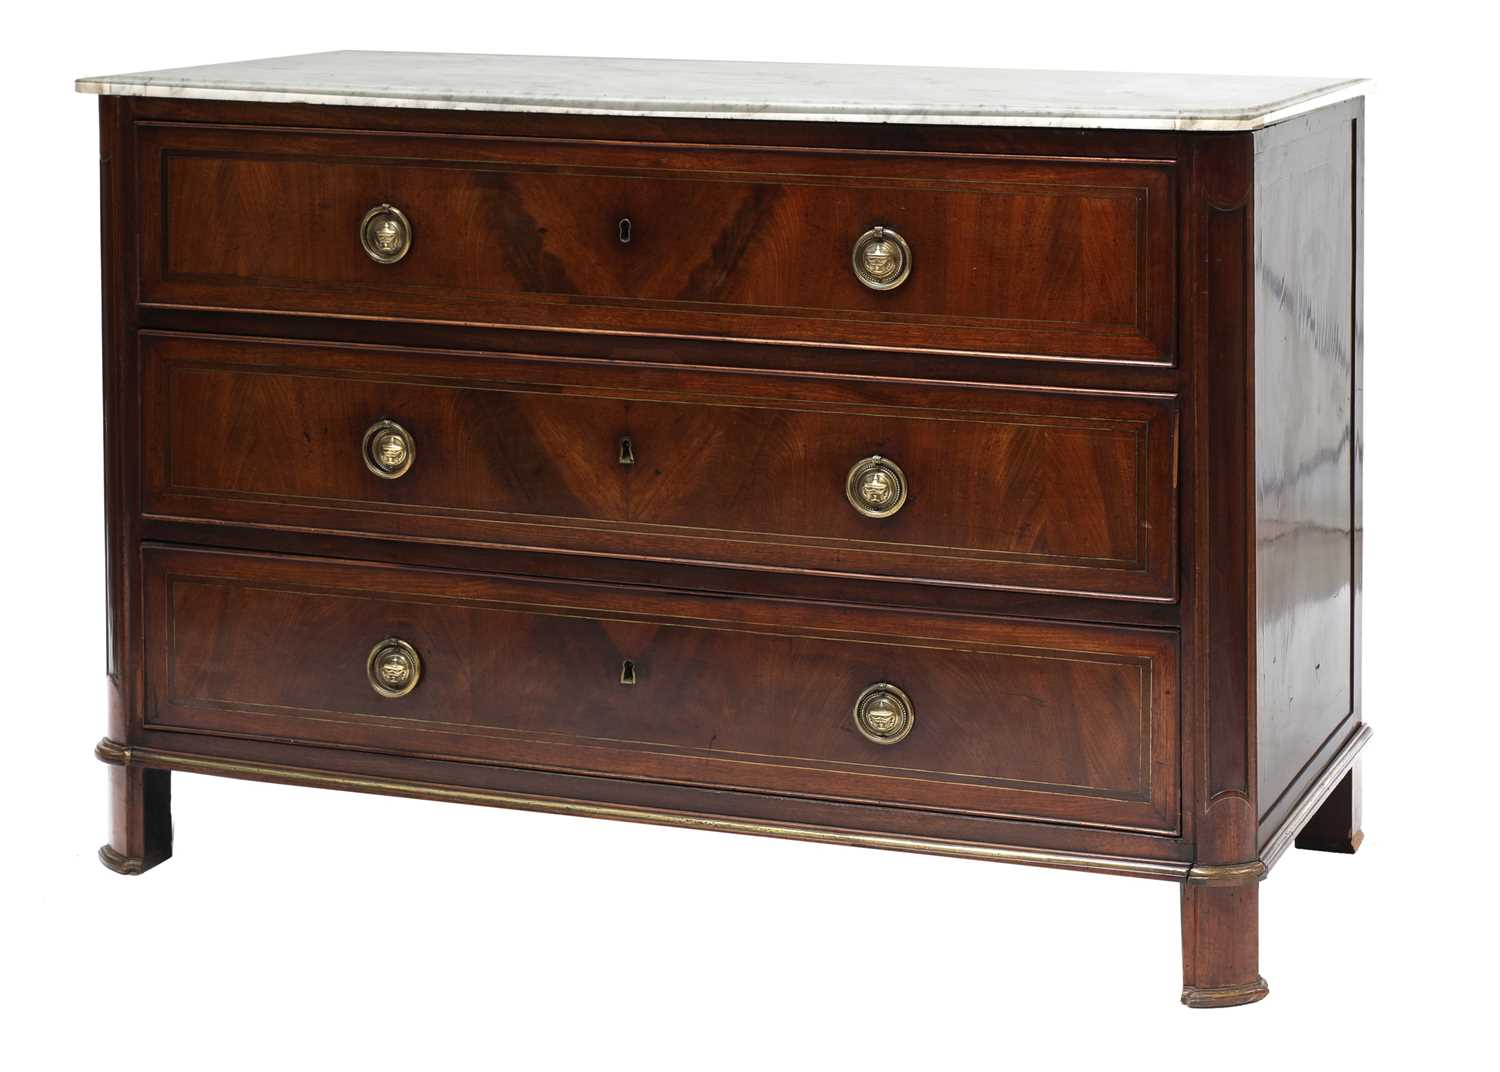 A French mahogany commode chest, - Image 2 of 5